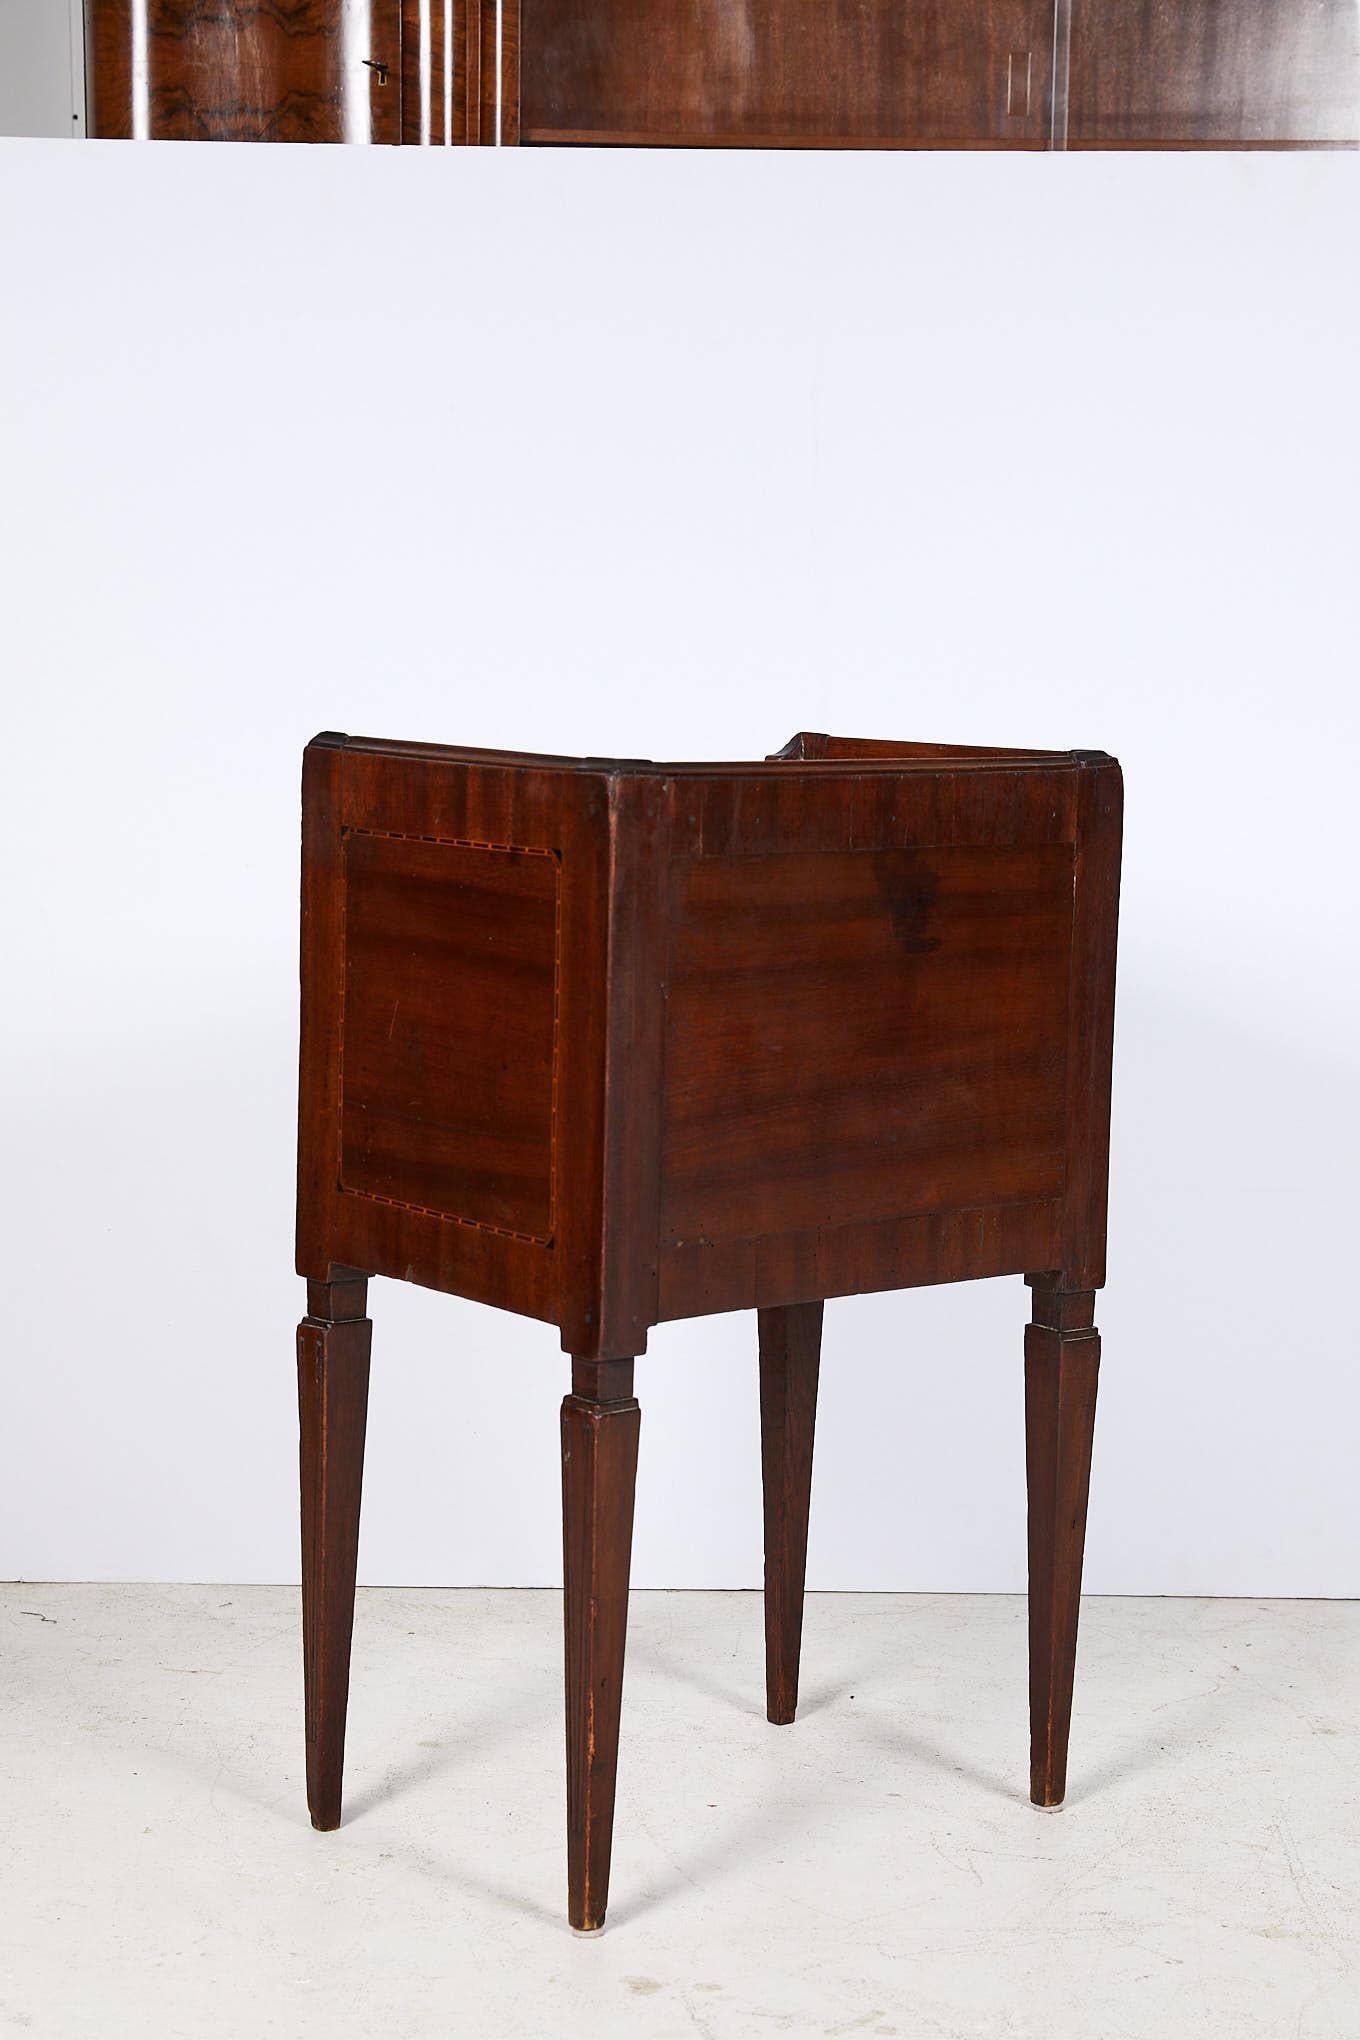 Ebony 19th Century Inlaid Tambour Front Side Table